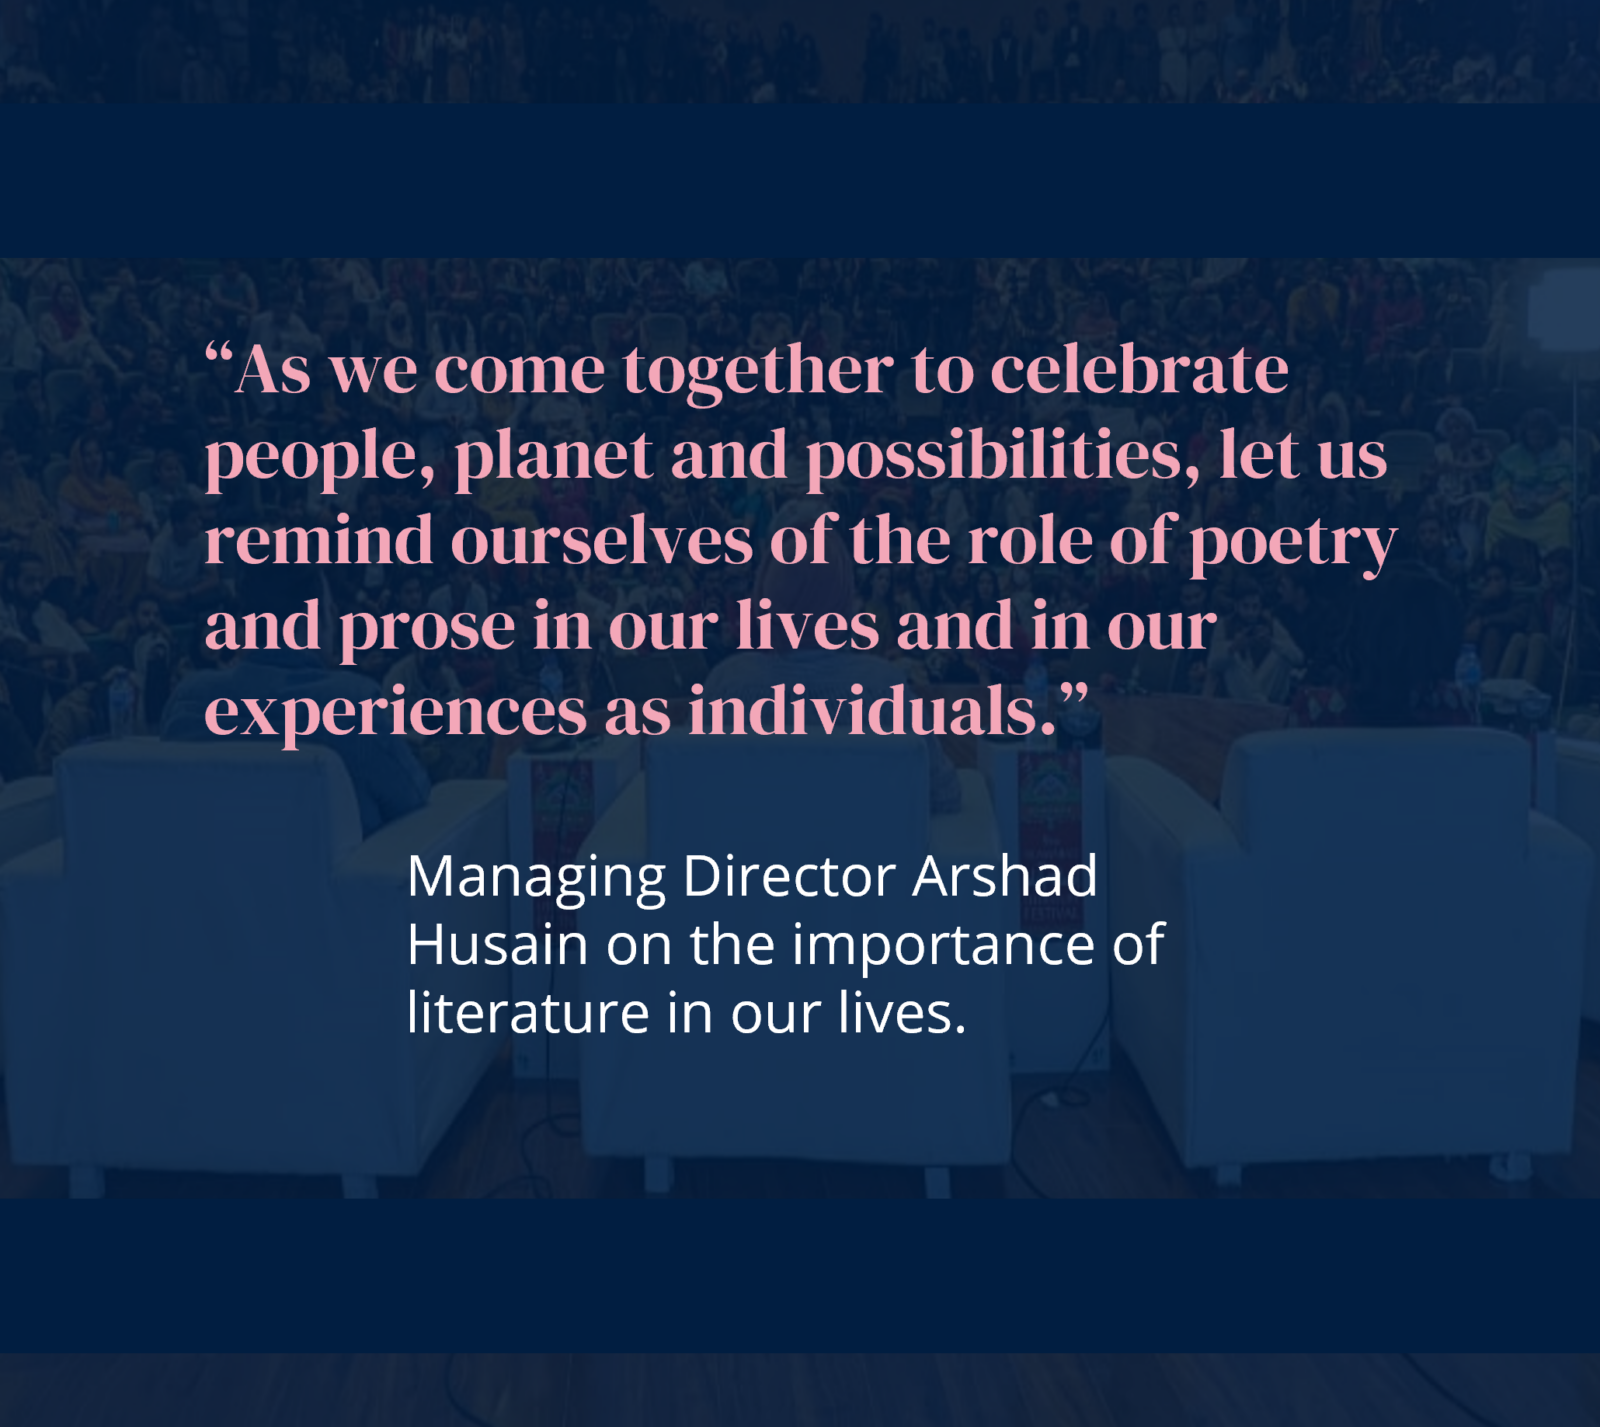 As we come together to celebrate people, planet and possibilities, let us remind ourselves of the role of poetry and prose in our lives and in our experiences as individuals. Managing Director Arshad Husain on the importance of literature in our lives.